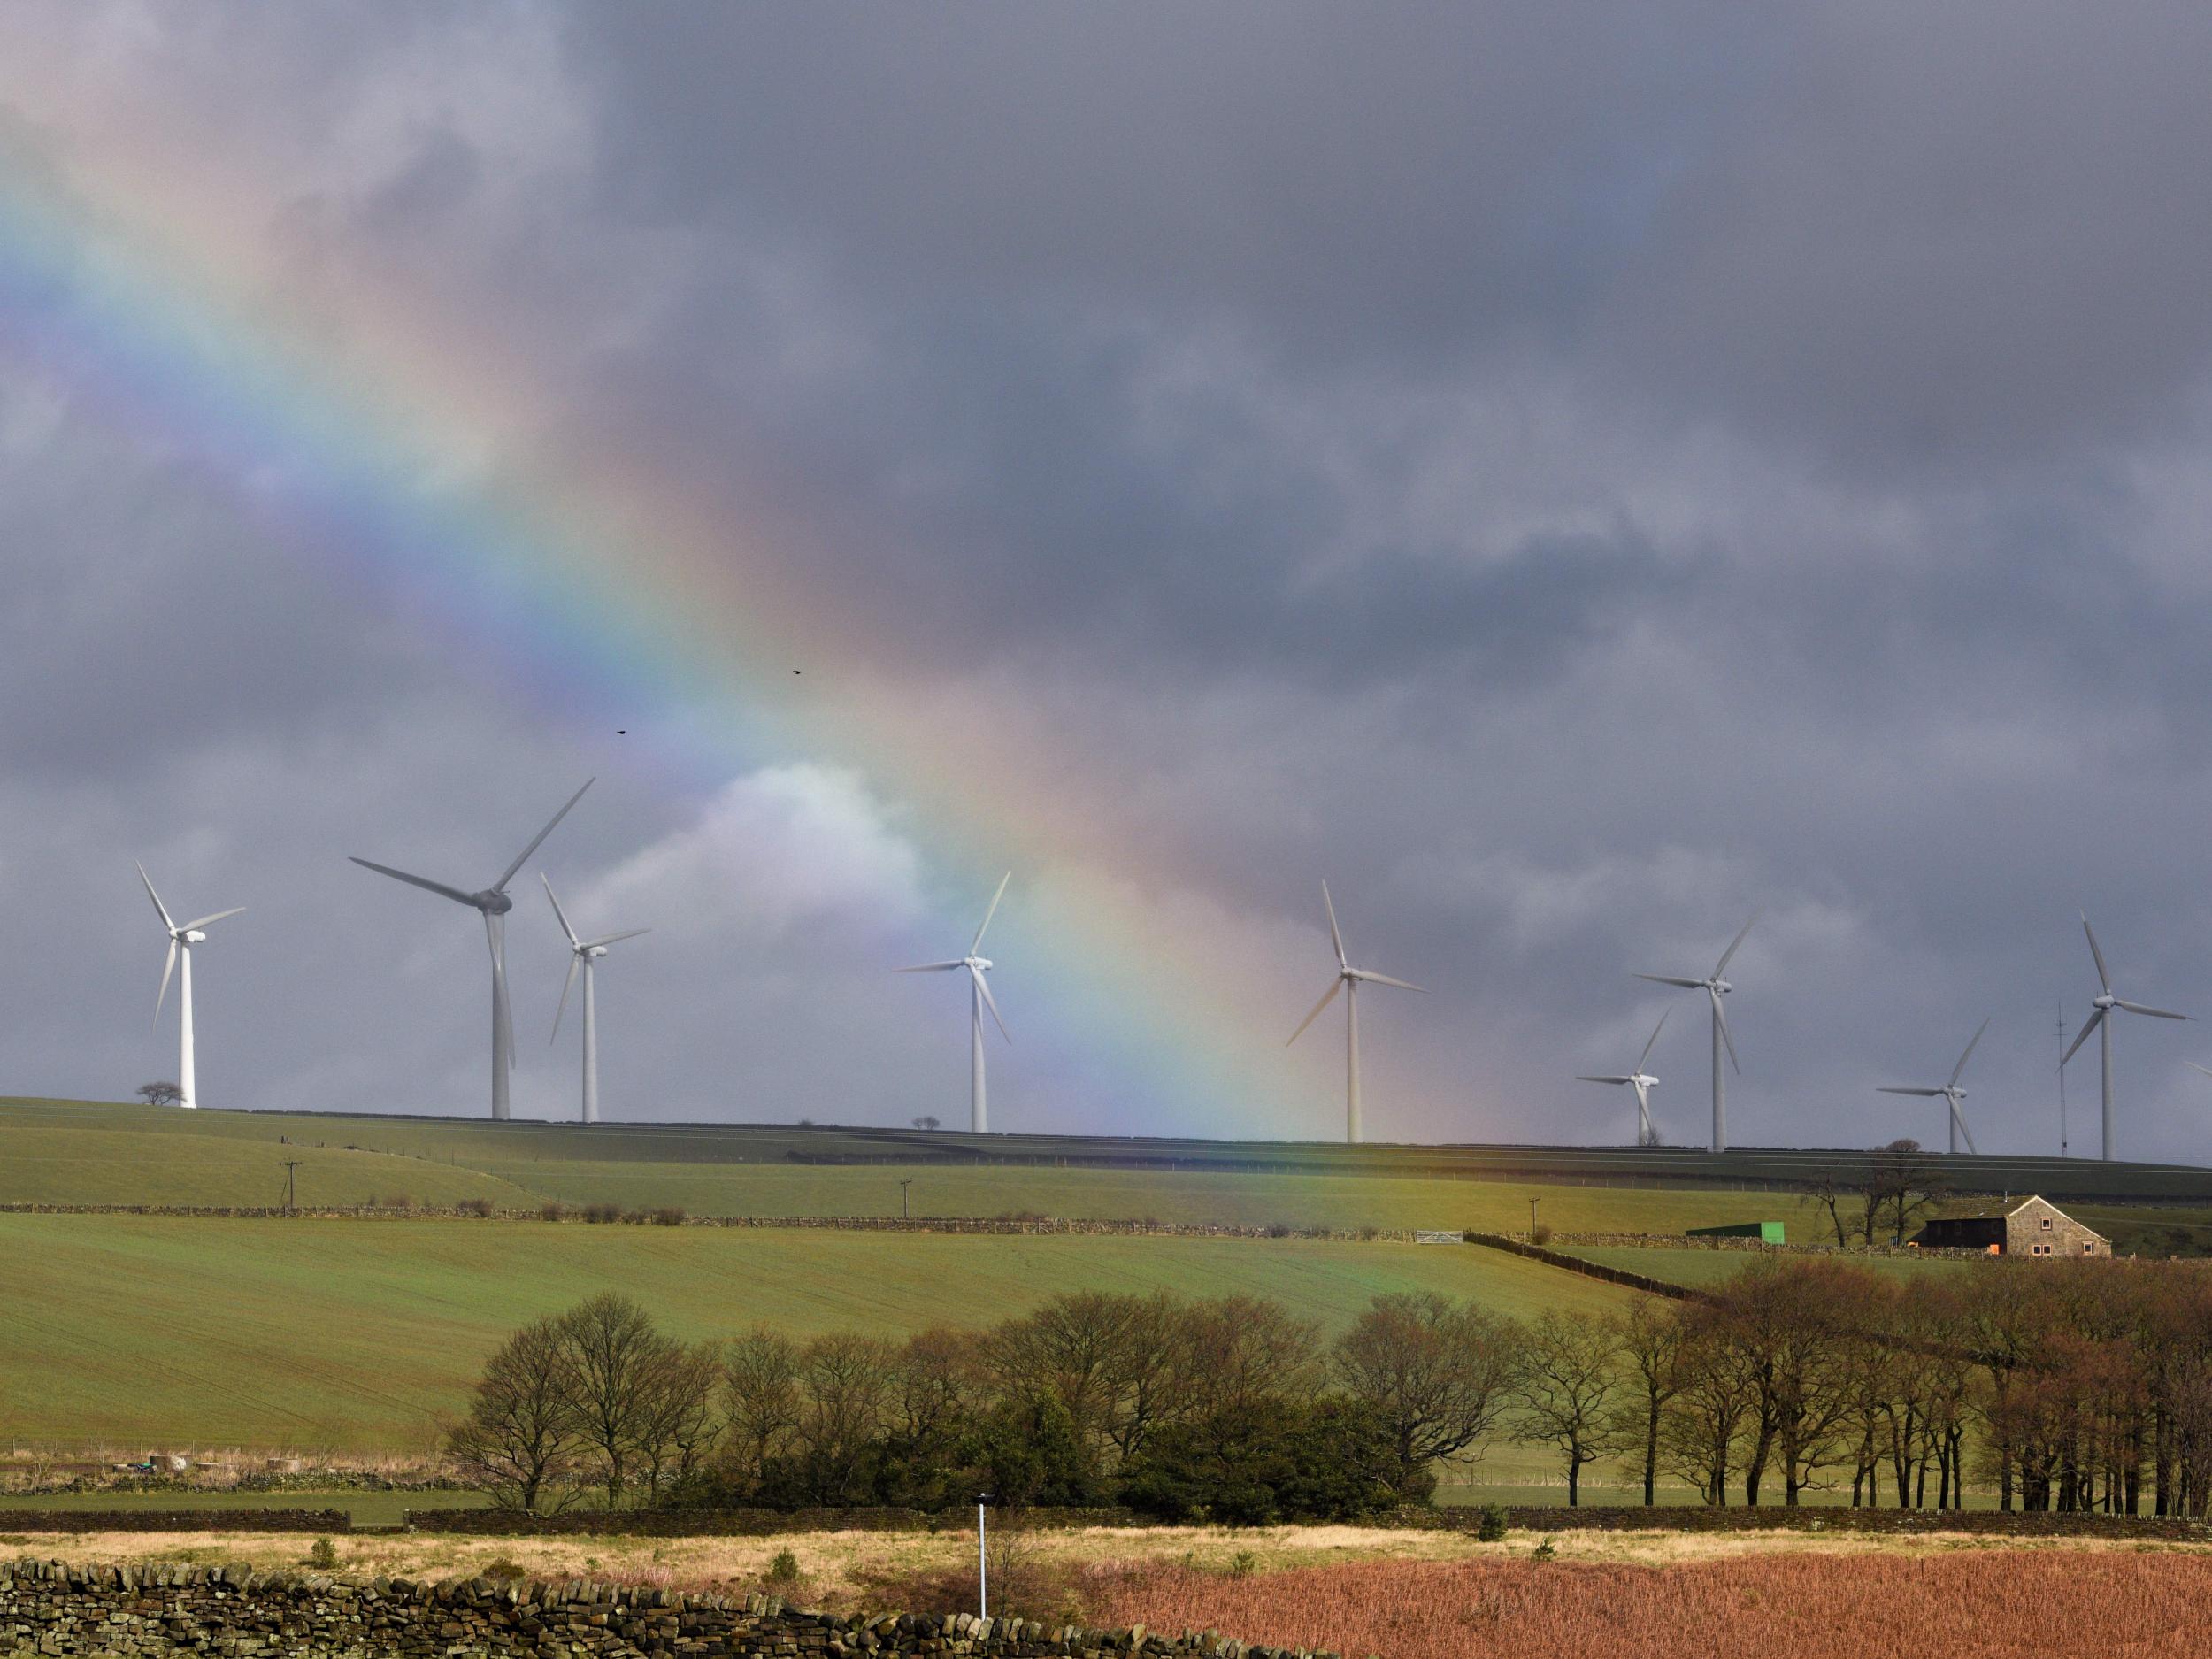 Among other achievements, 2017 saw the most wind power produced in a day in the UK